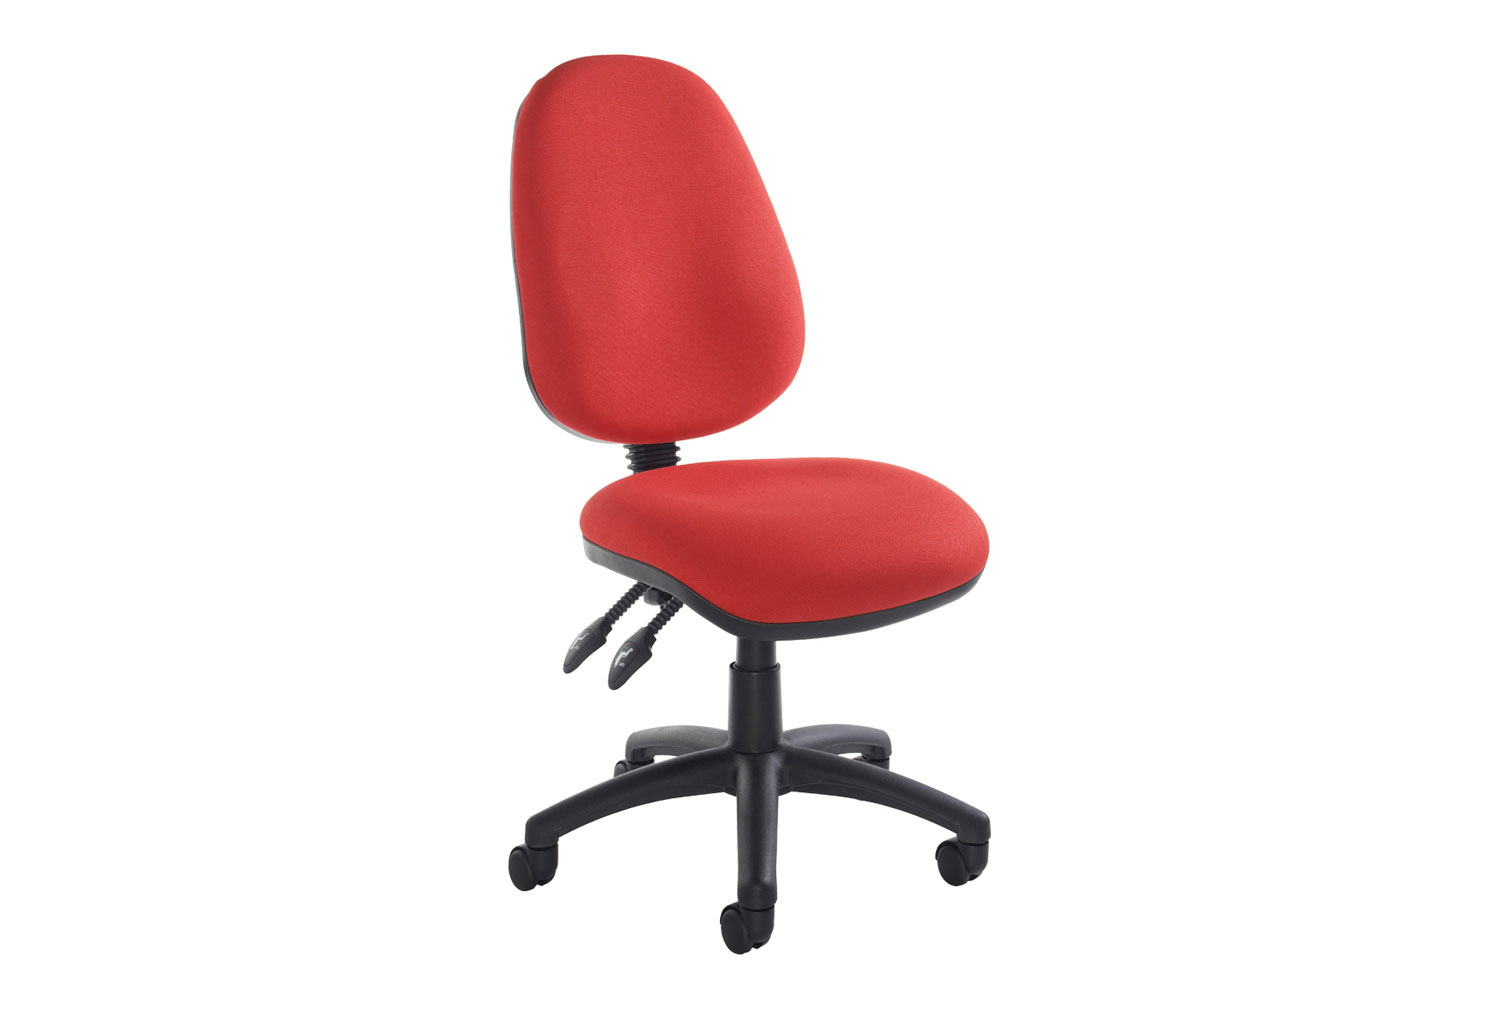 Full Lumbar 2 Lever Operator Office Chair No Arms, Red, Express Delivery